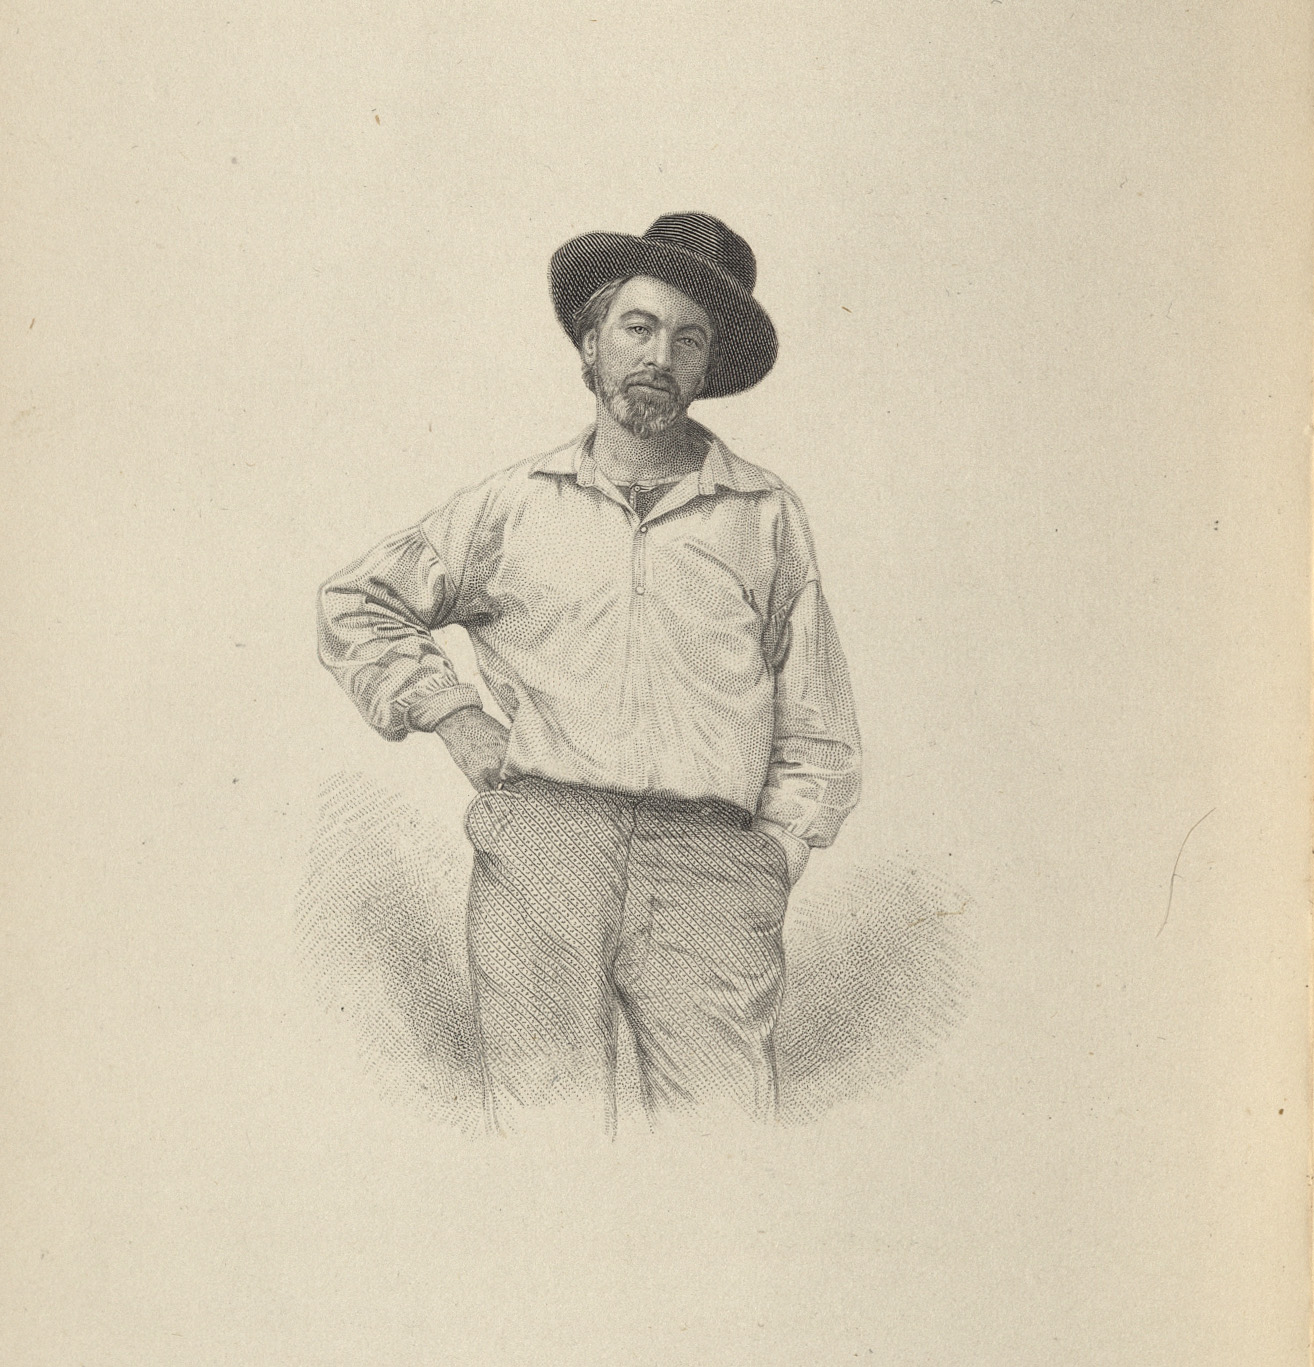 1855 engraving of Whitman from the Author's Edition, 1882